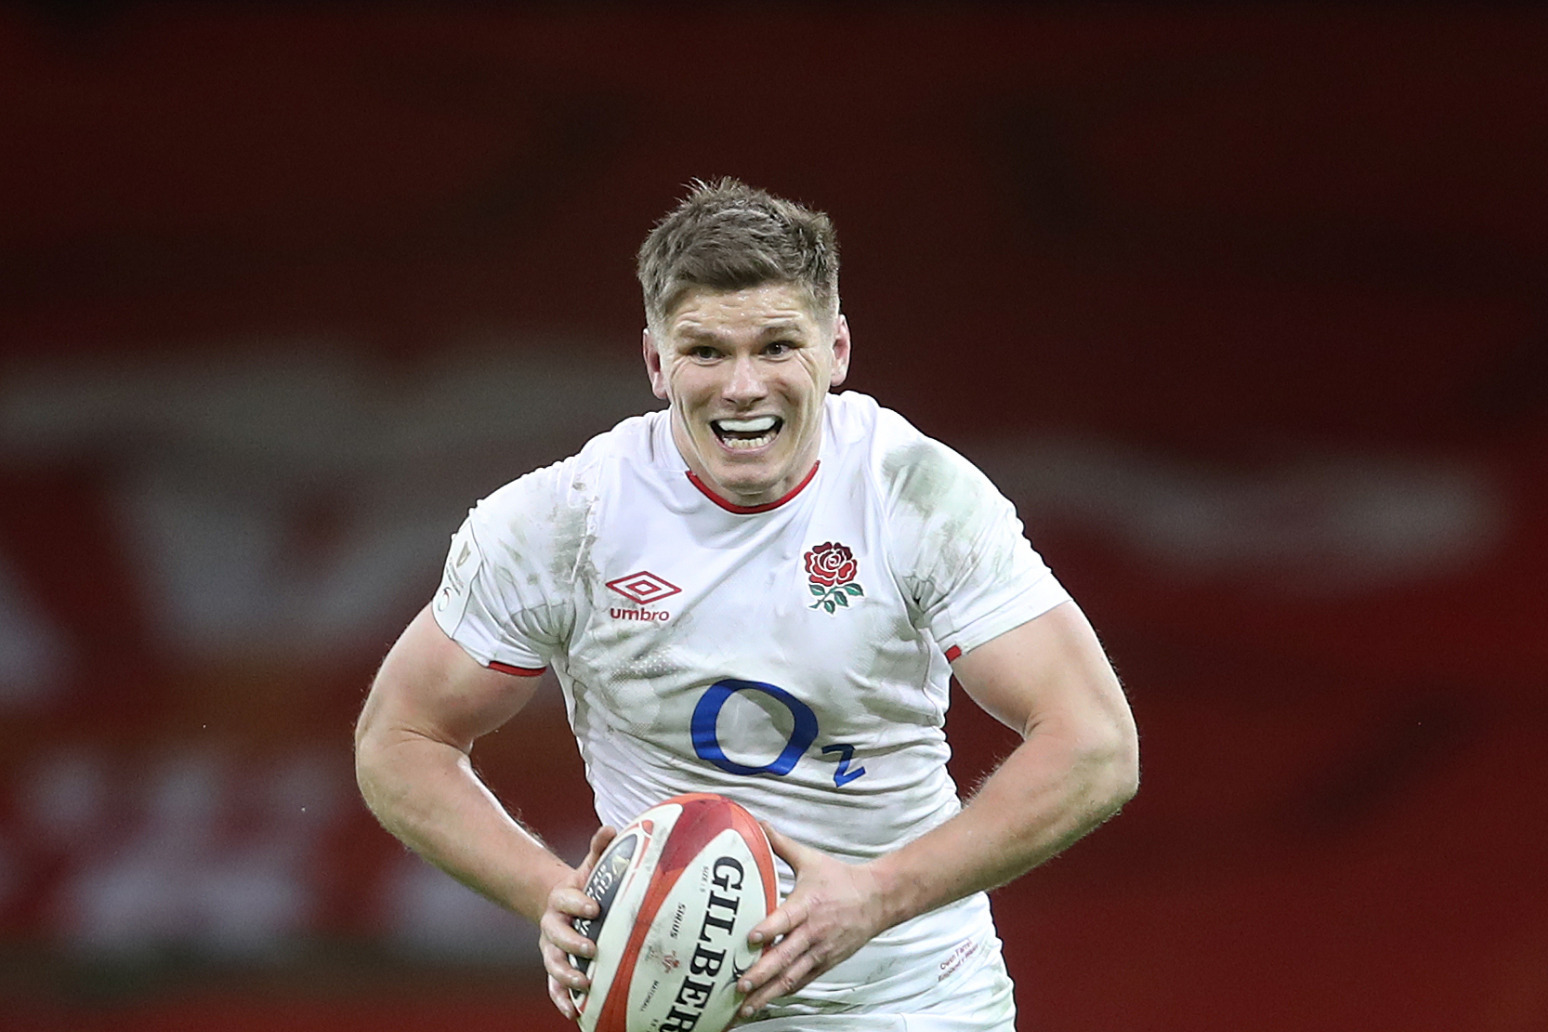 Owen Farrell will captain England during the Six Nations 